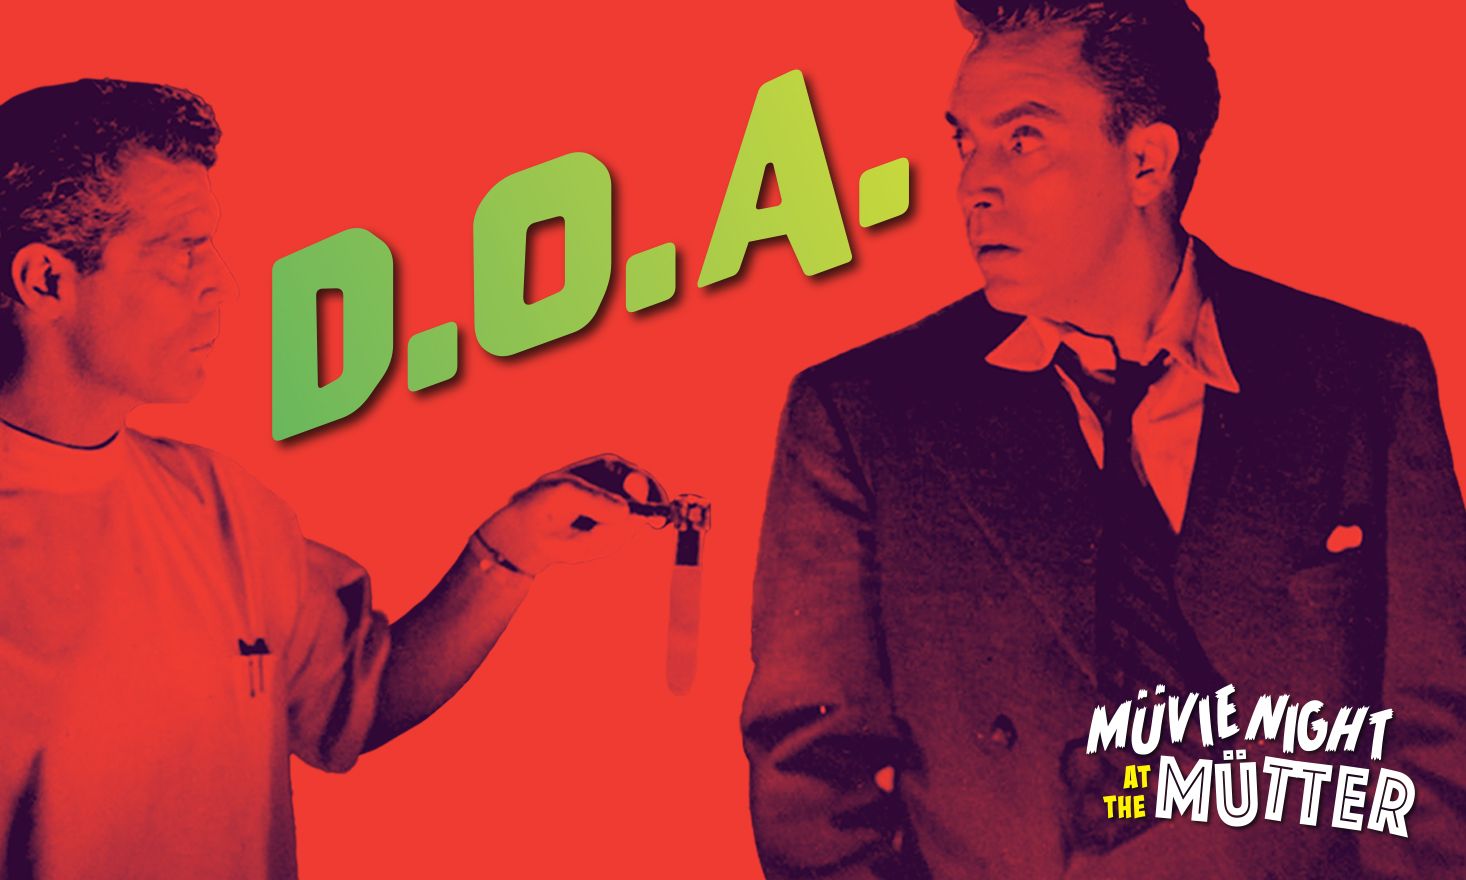 Red image of two men looking at each other with green text that reads "D.O.A." and "Müvie Night at the Mütter".